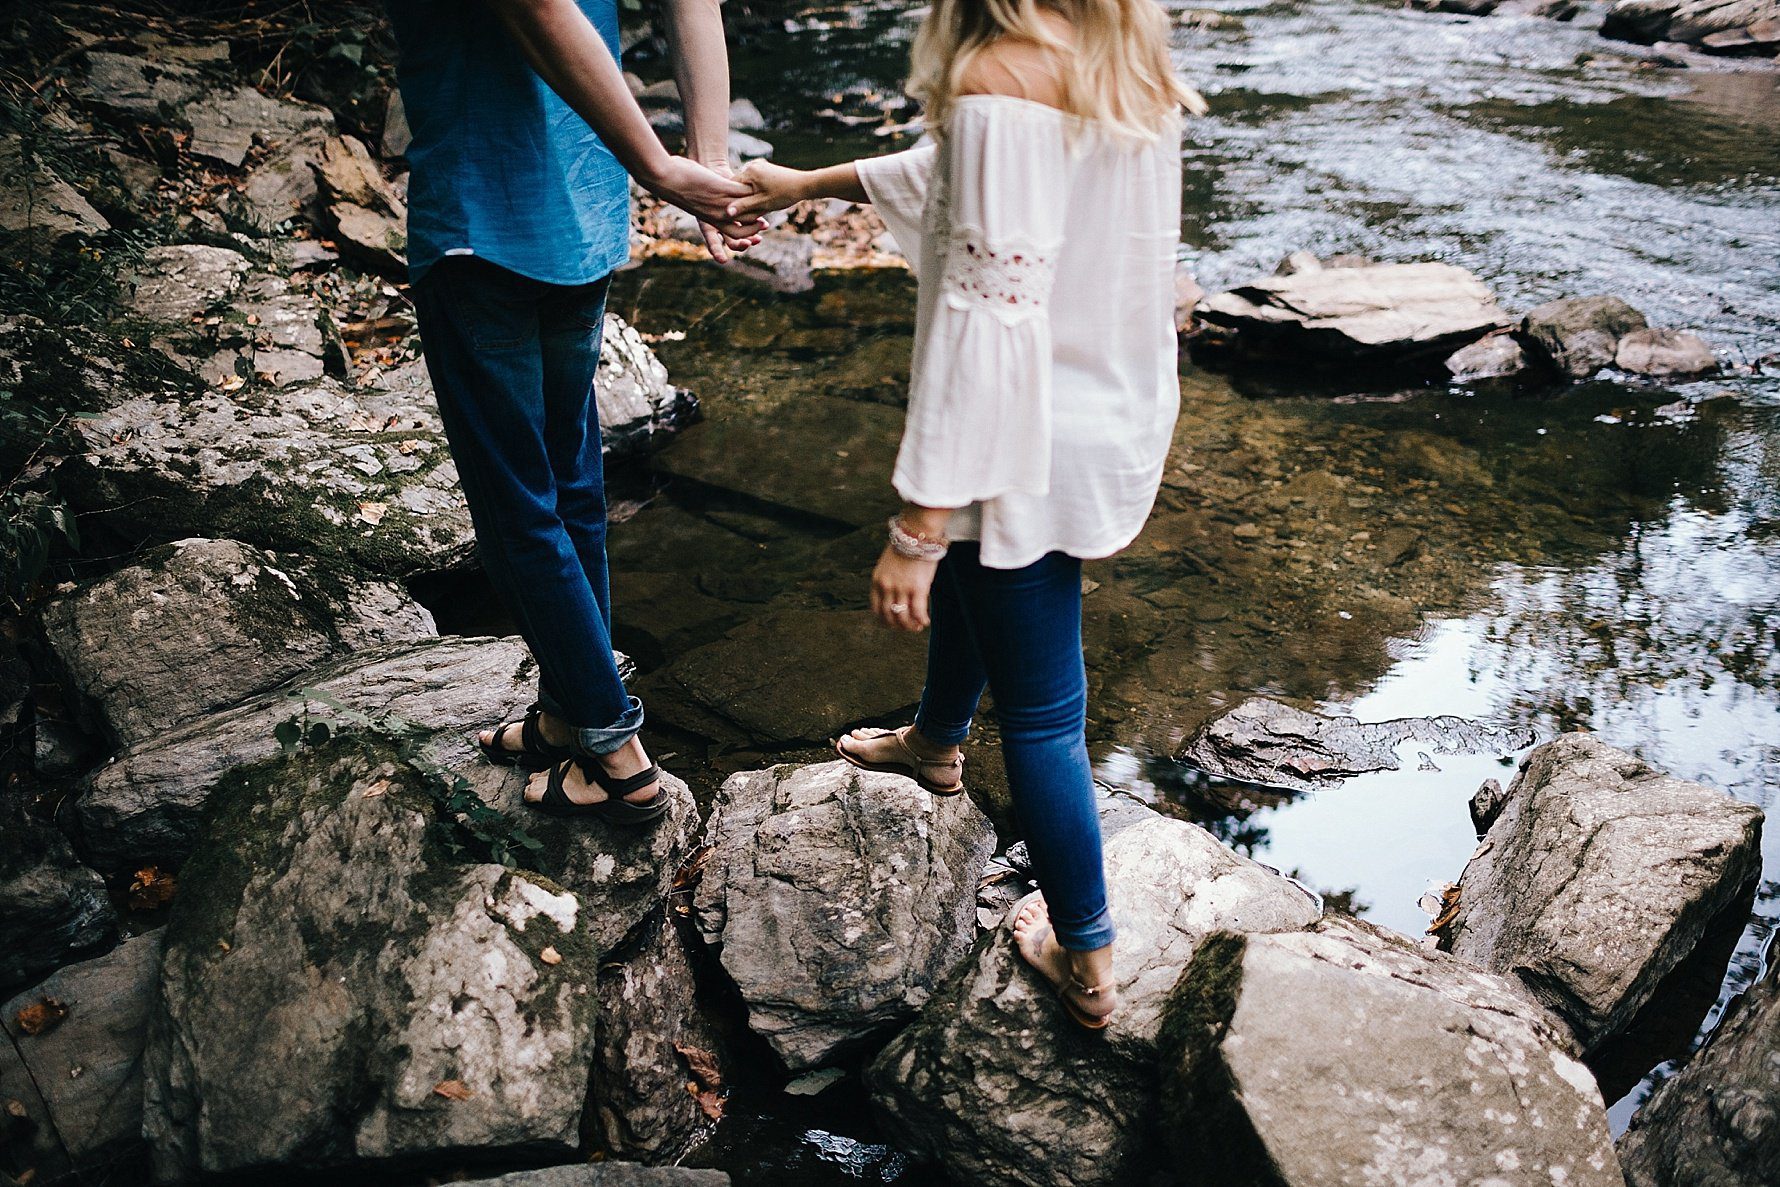 Smoky Mountain National Park Engagement Photography | Erin Morrison Photography www.erinmorrisonphotography.com